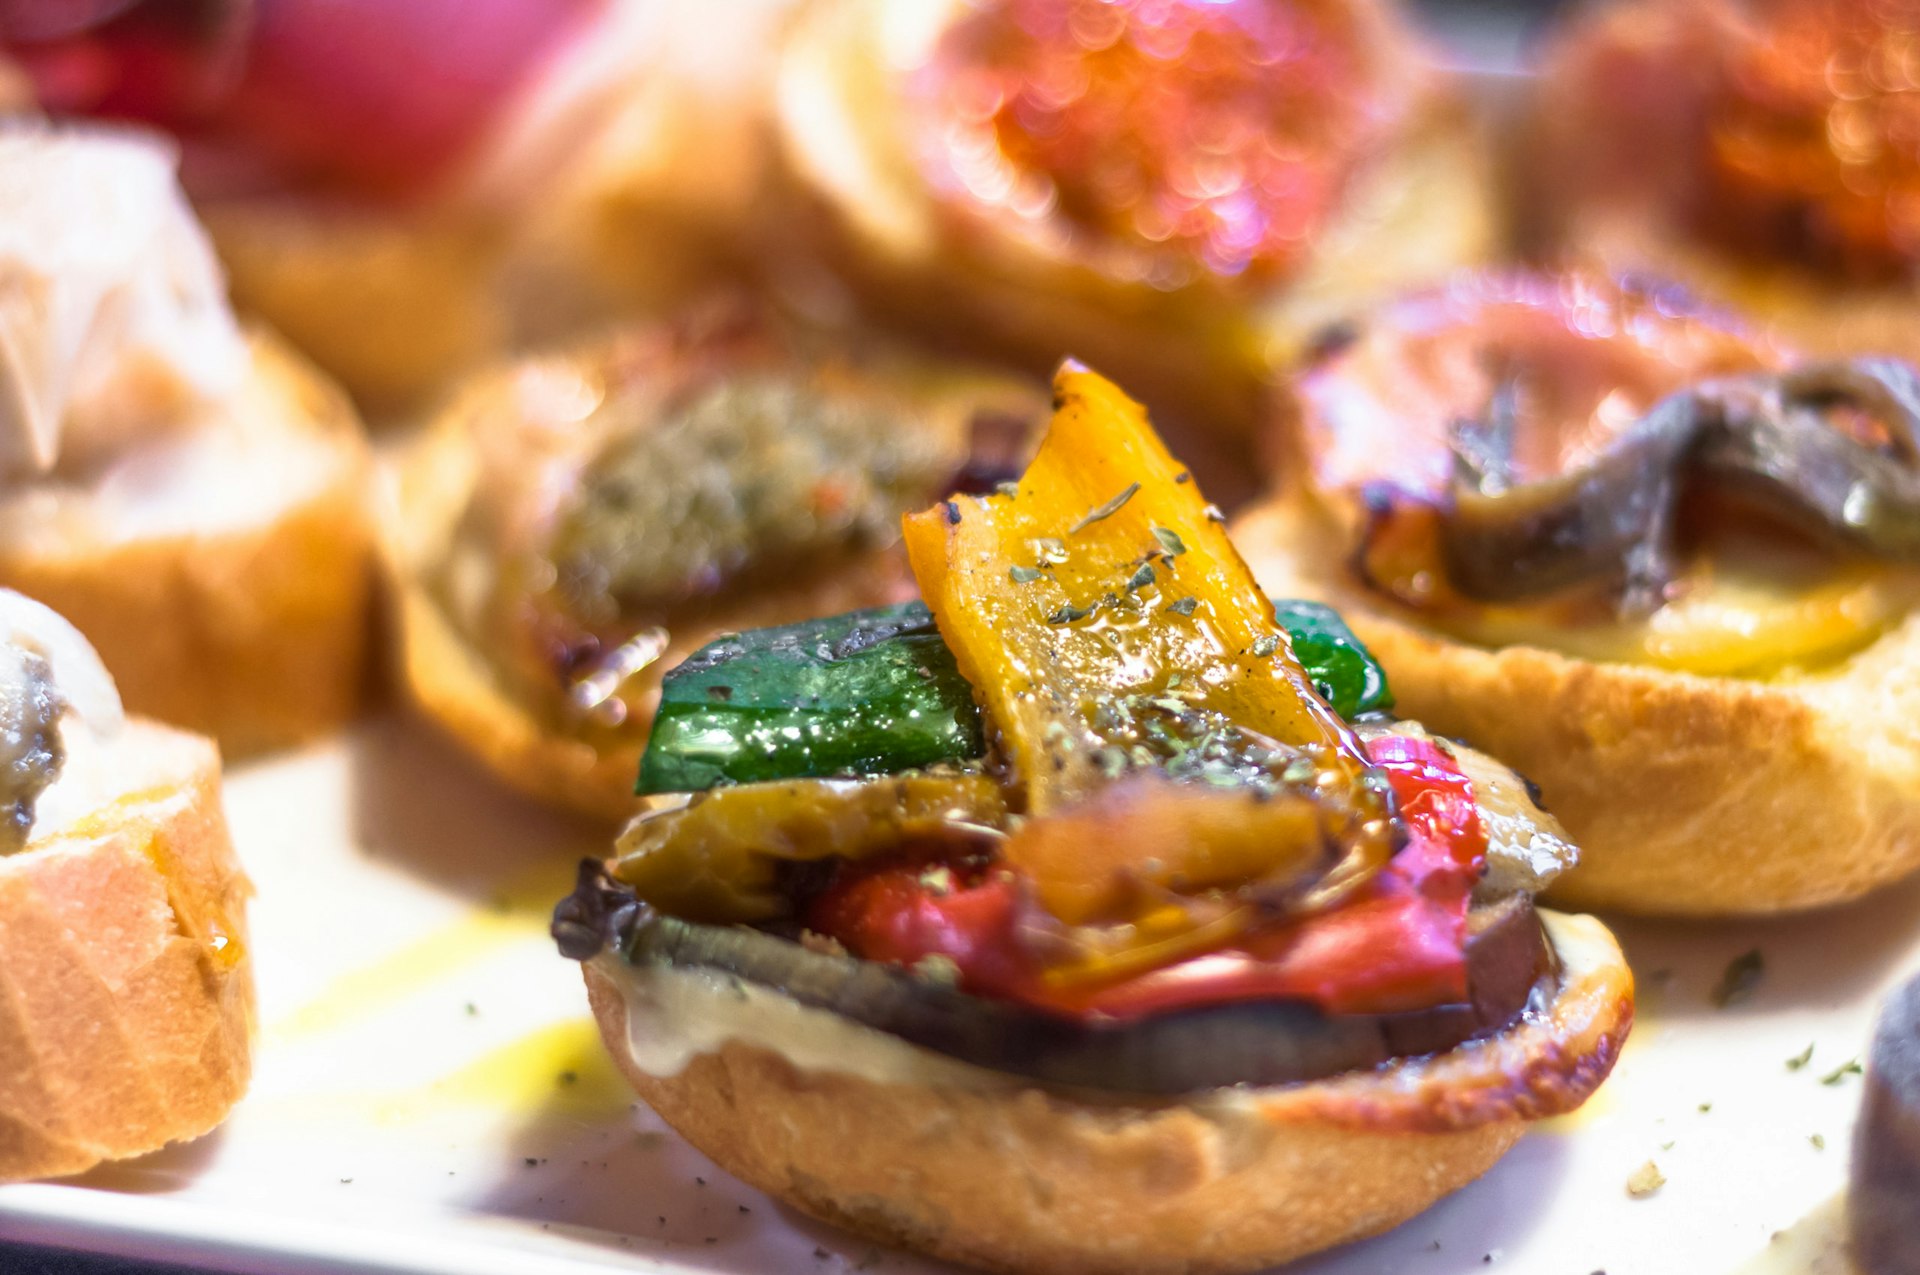 A close up of peppers on some bread, one of the traditional 'cicchetti' snacks in Venice.